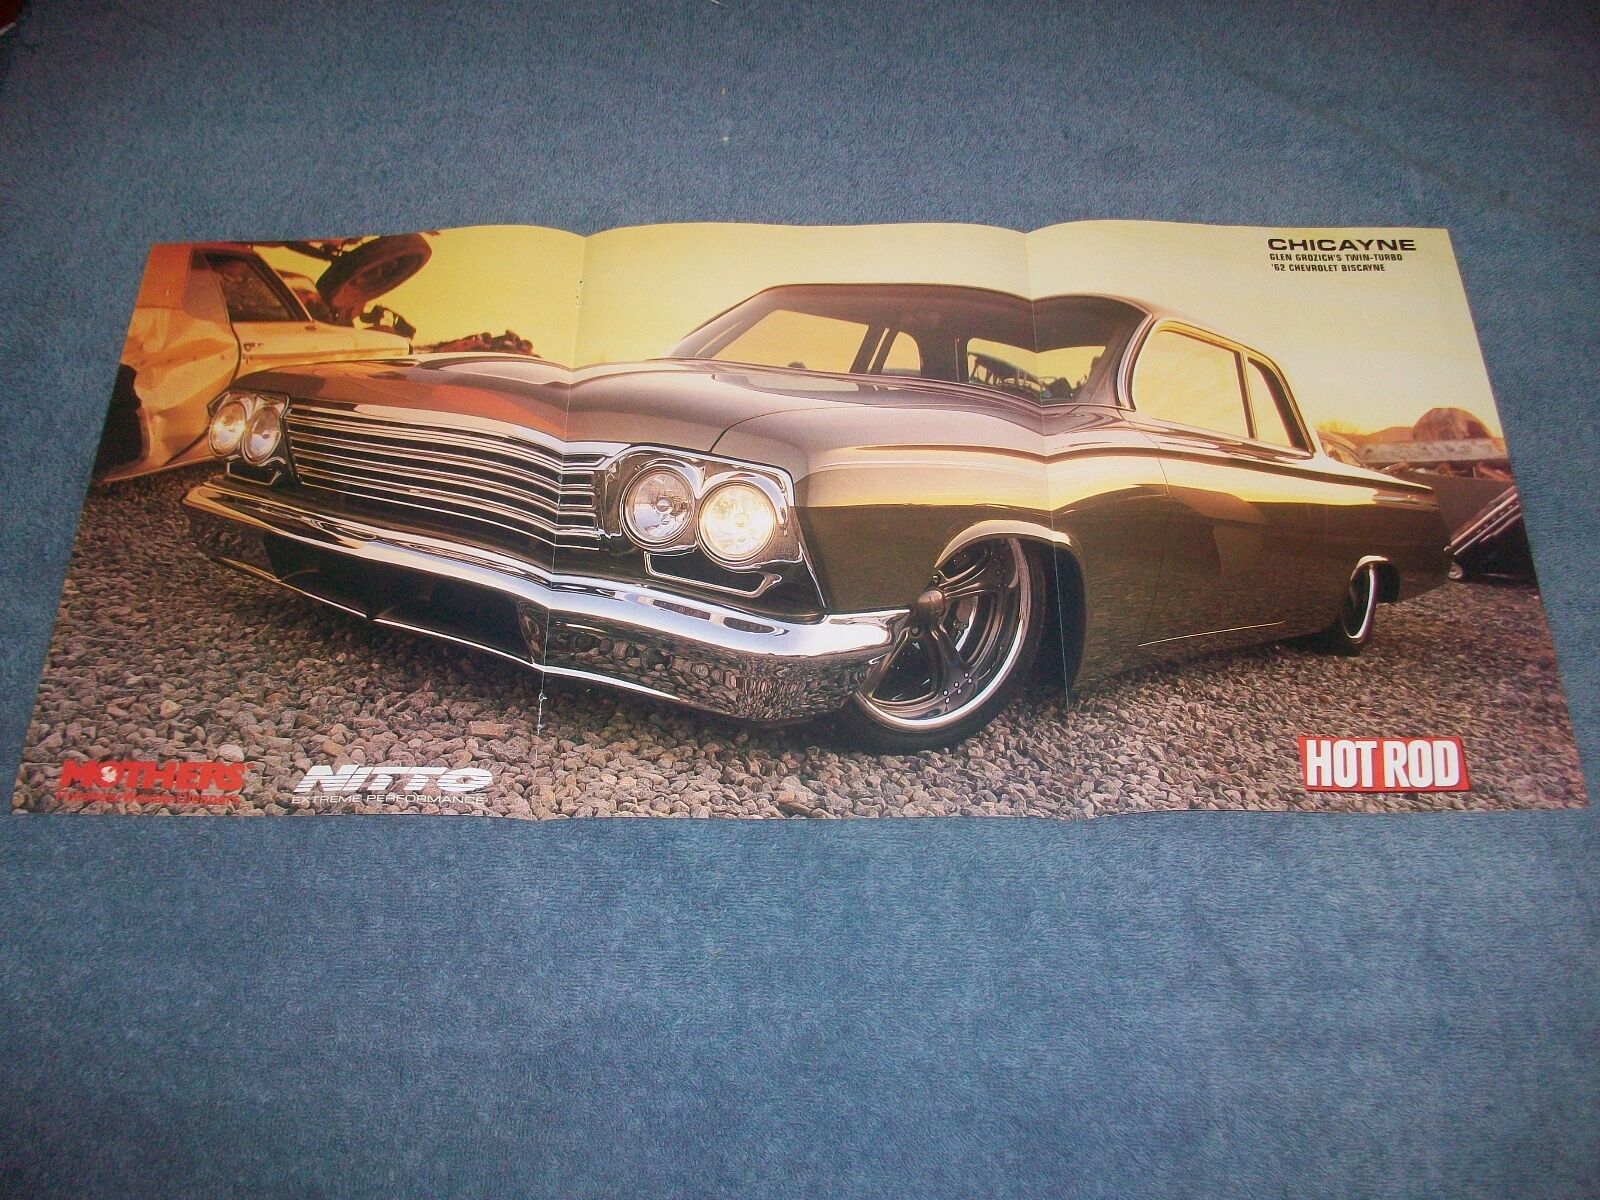 1962 Chevy Biscayne Custom Twin Turbo Poster Chicayne Rad Rides by Troy